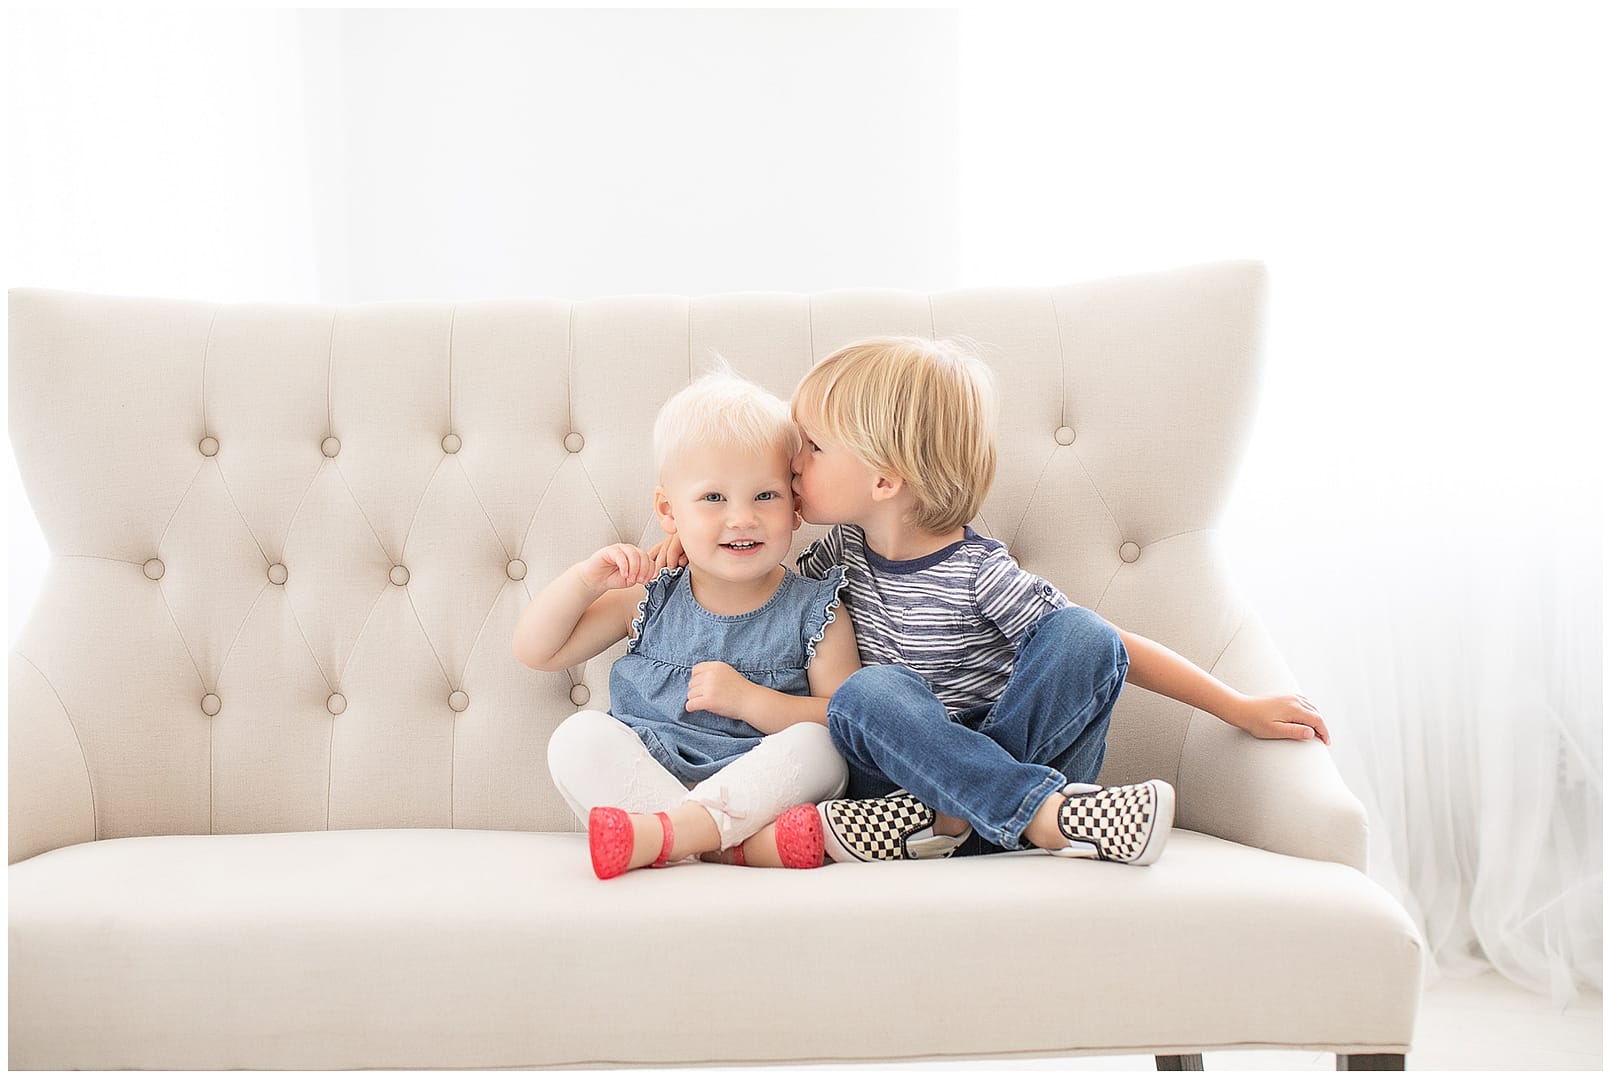 Siblings embrace in Boise studio session. Photos by Tiffany Hix Photography.